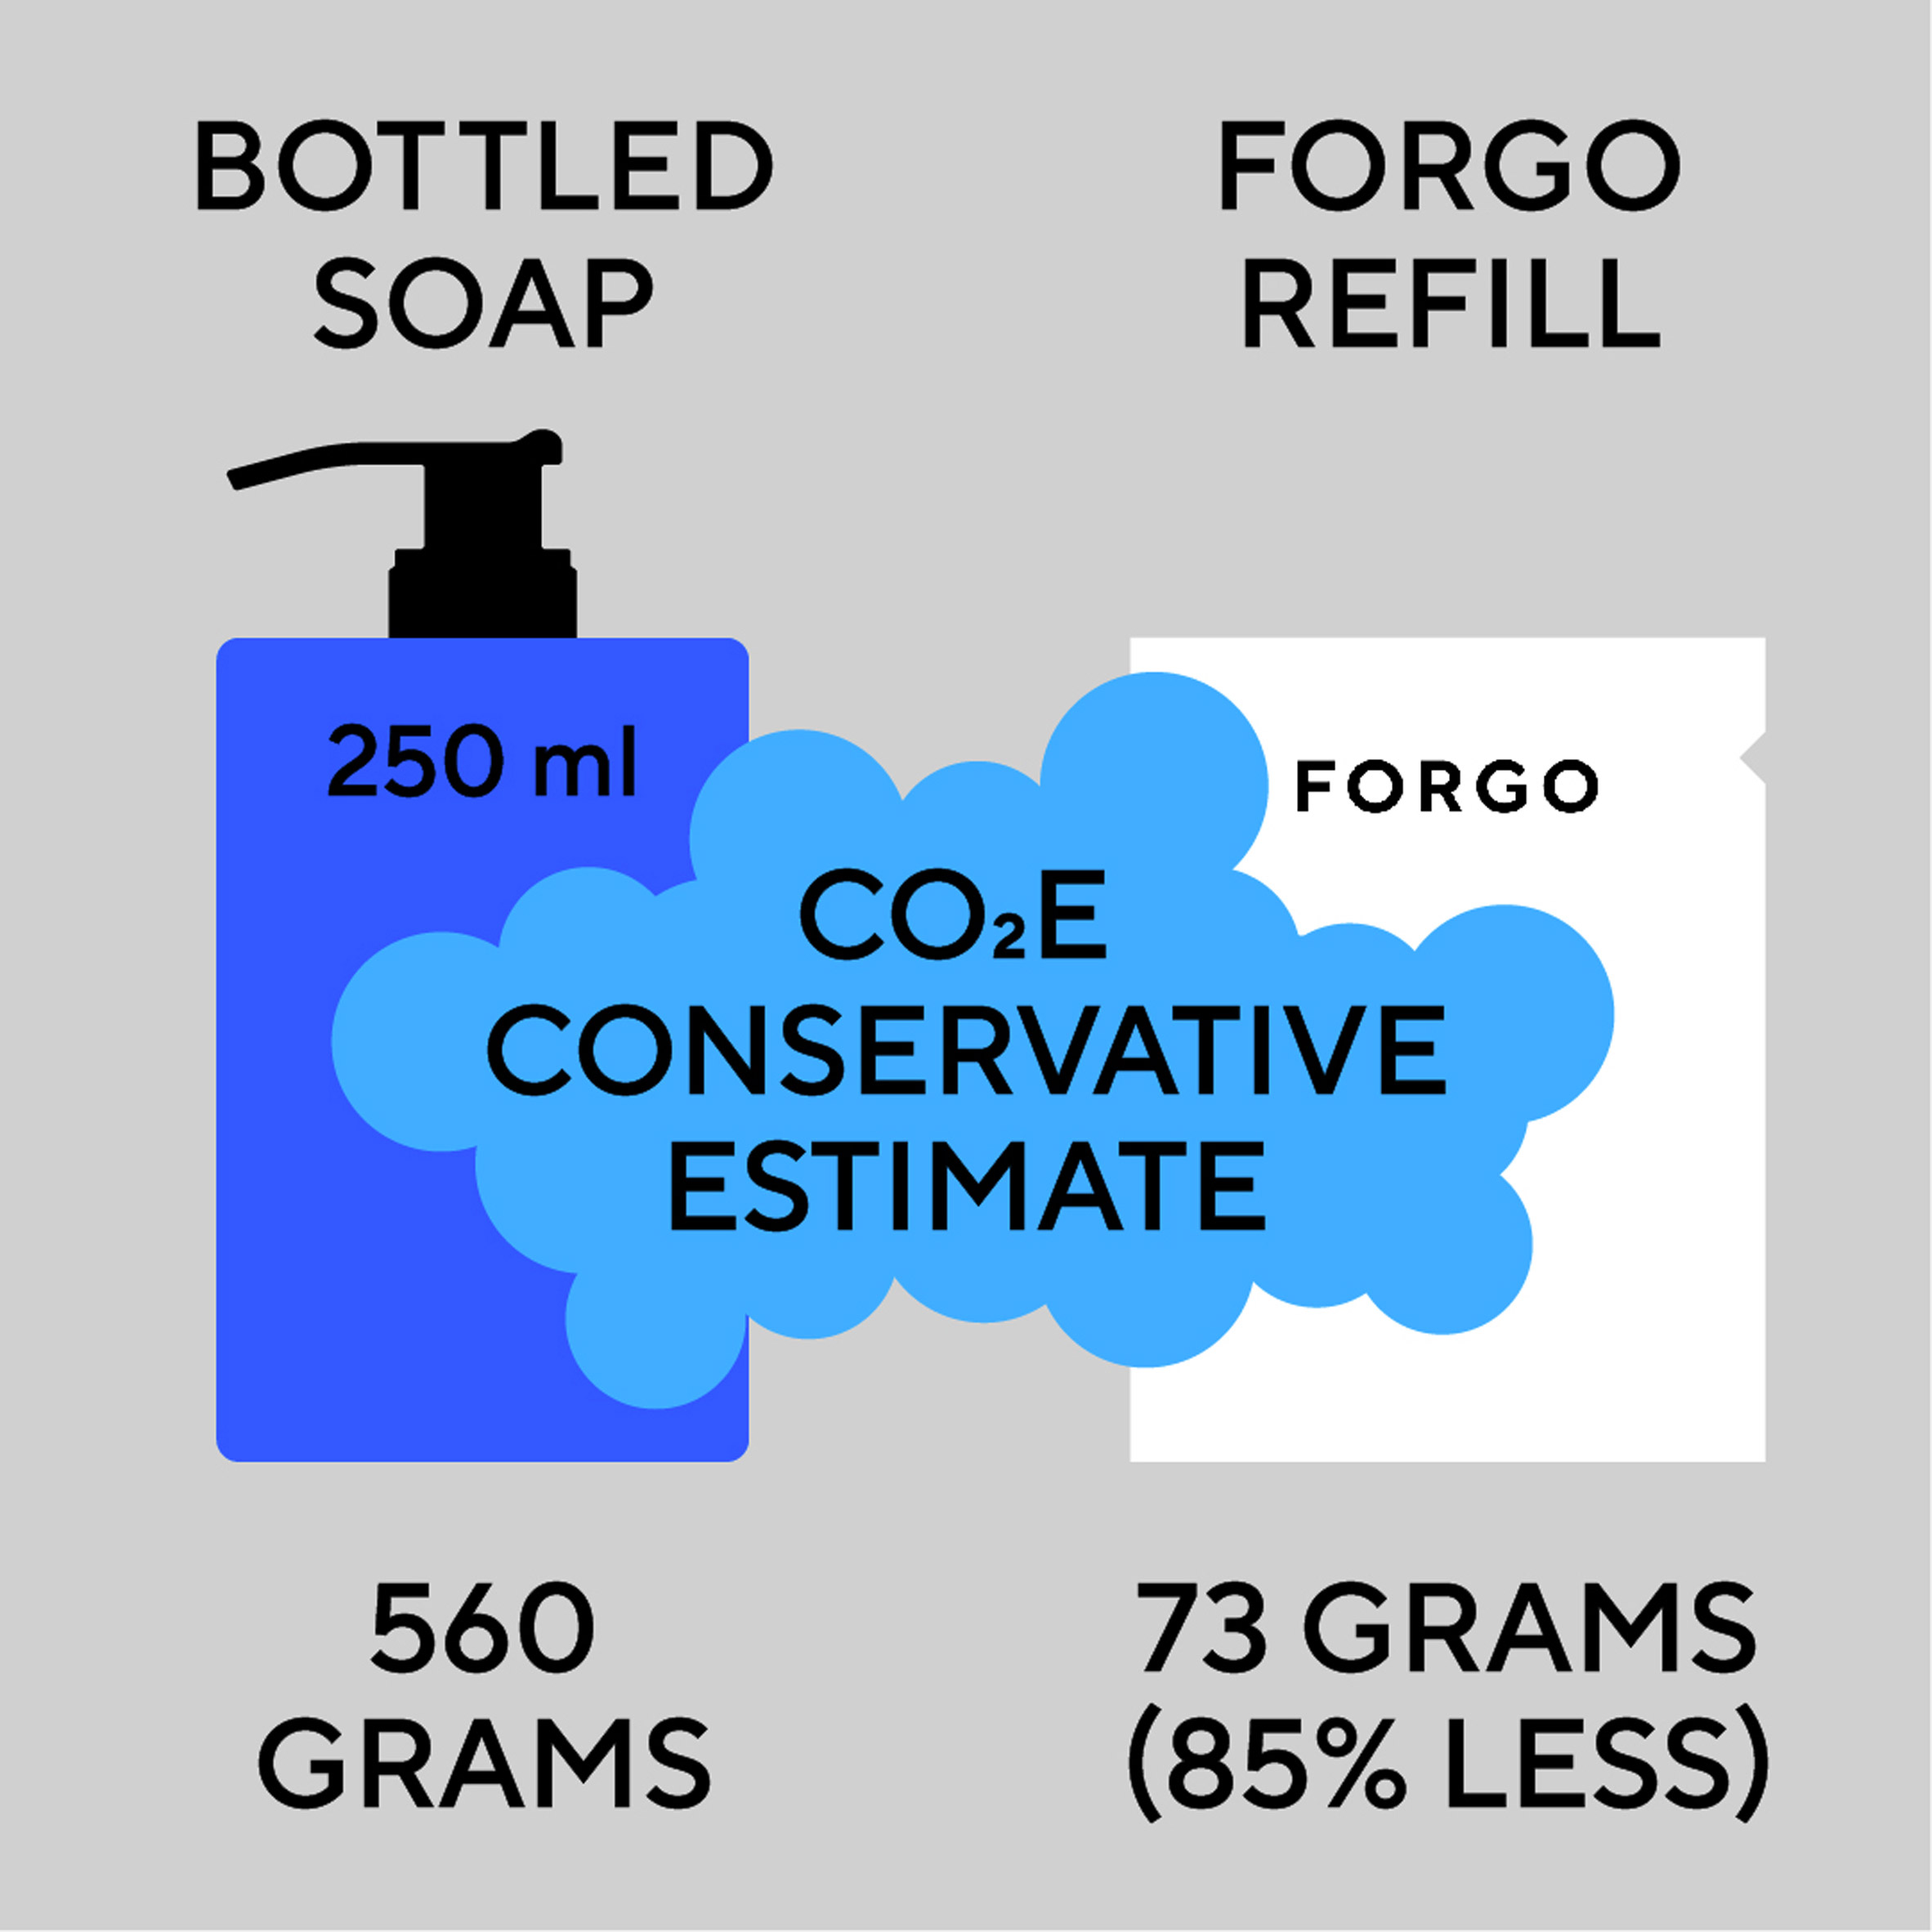 Carbon footprint comparison of bottled soap and paper refill sachet by Forgo